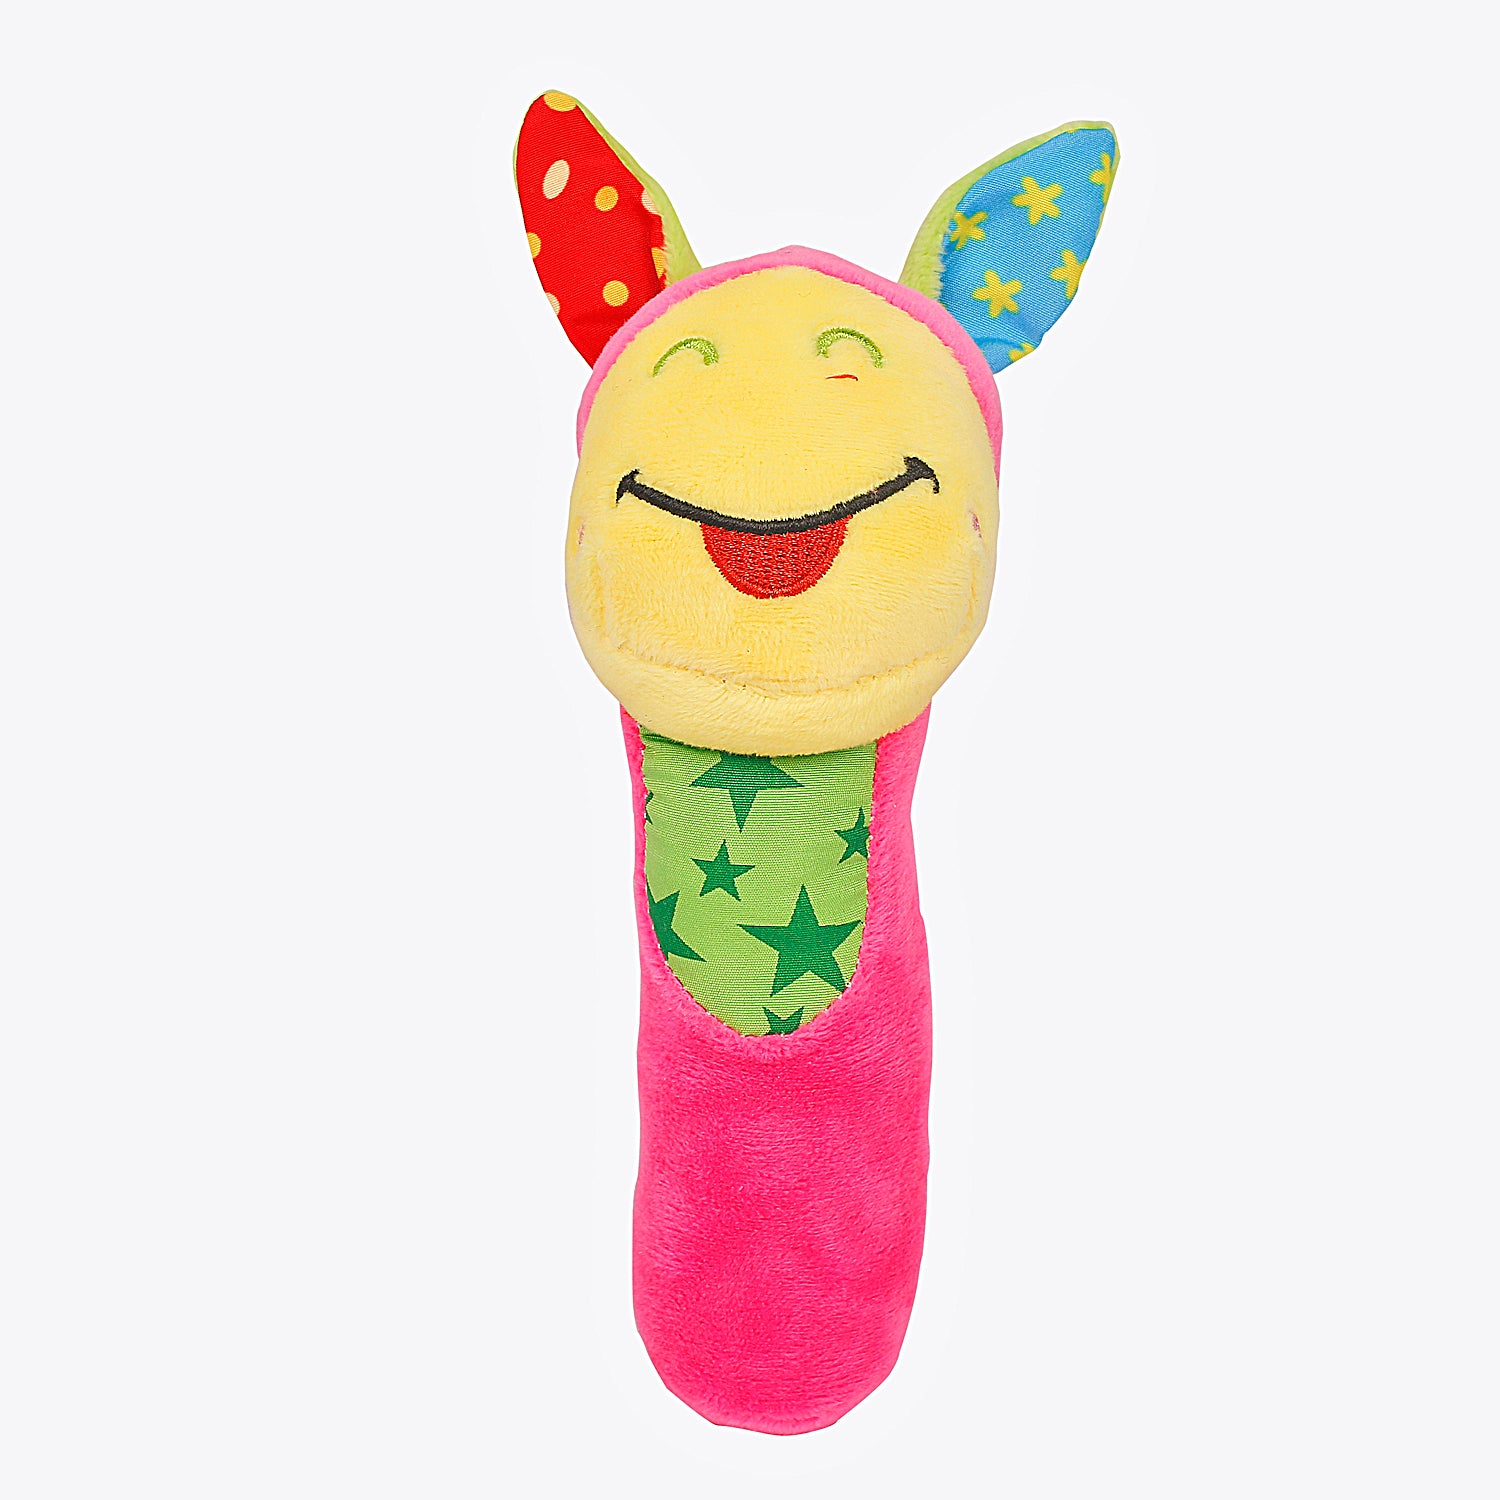 Baby Moo Smiling Star Pink Rattle